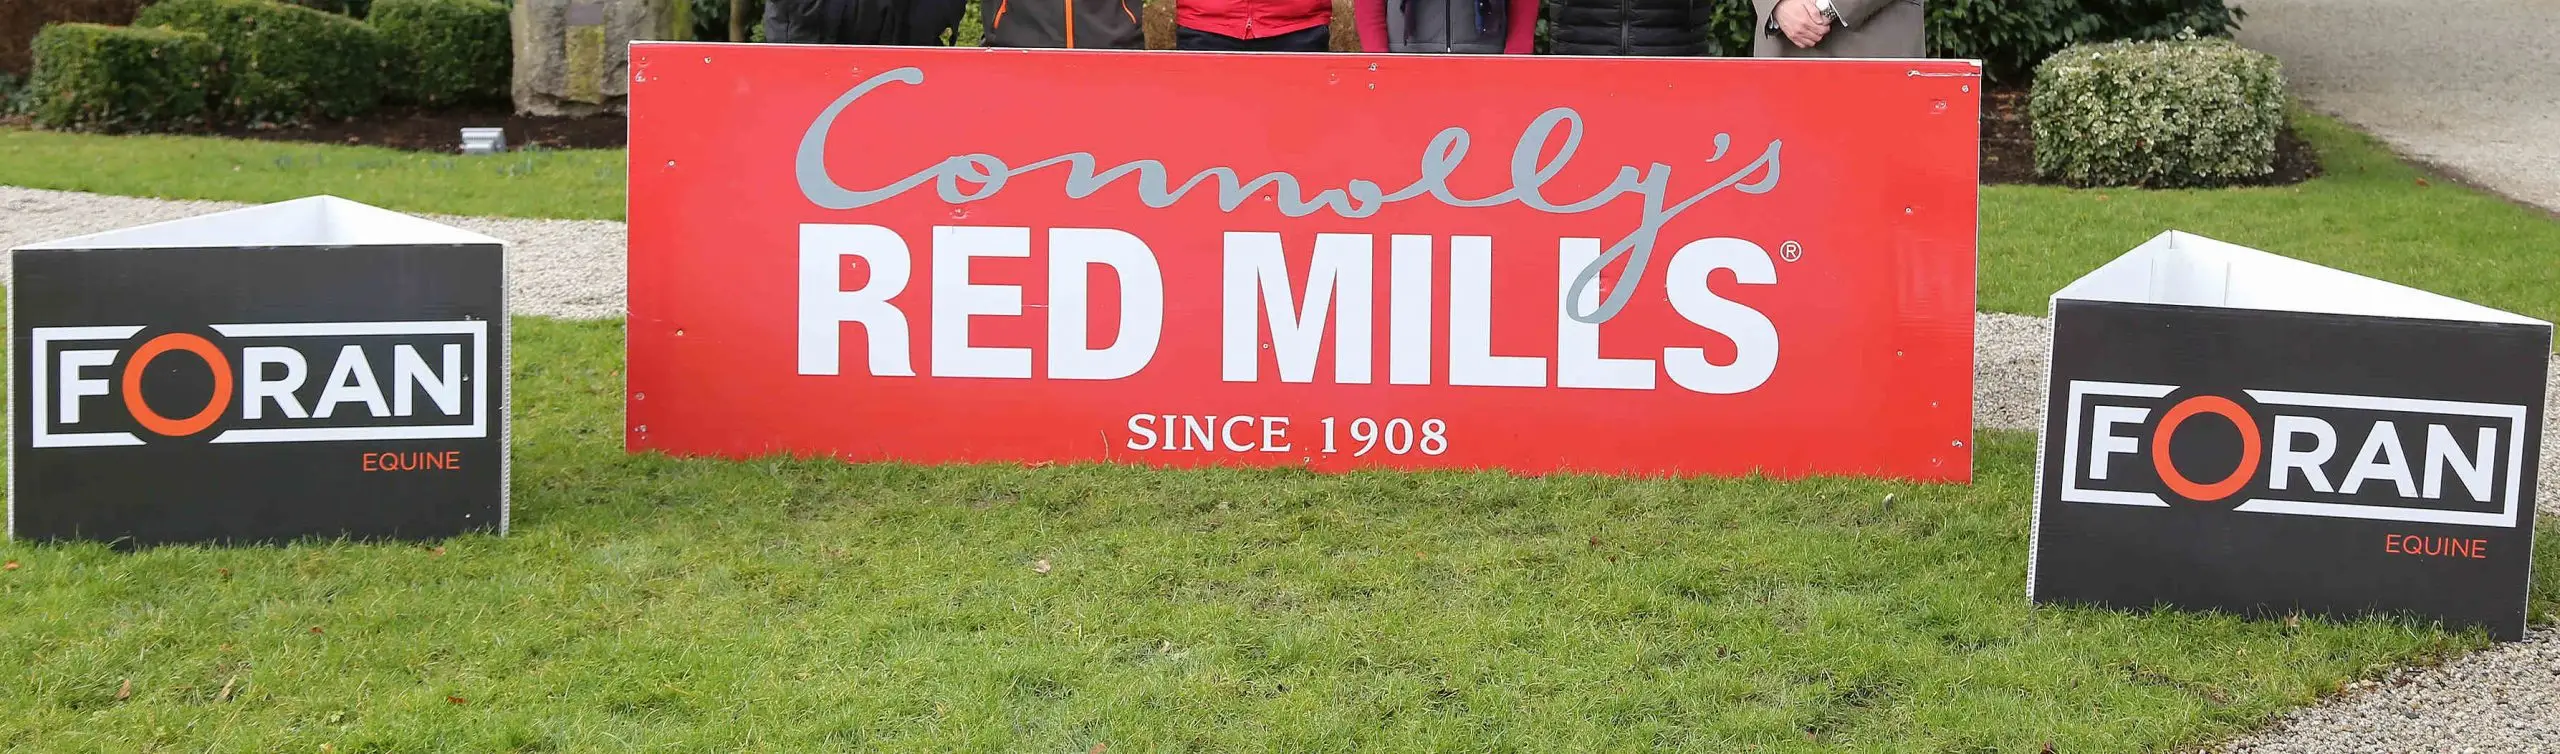 Connolly’S RED MILLS continue Spring Tour Sponsorship